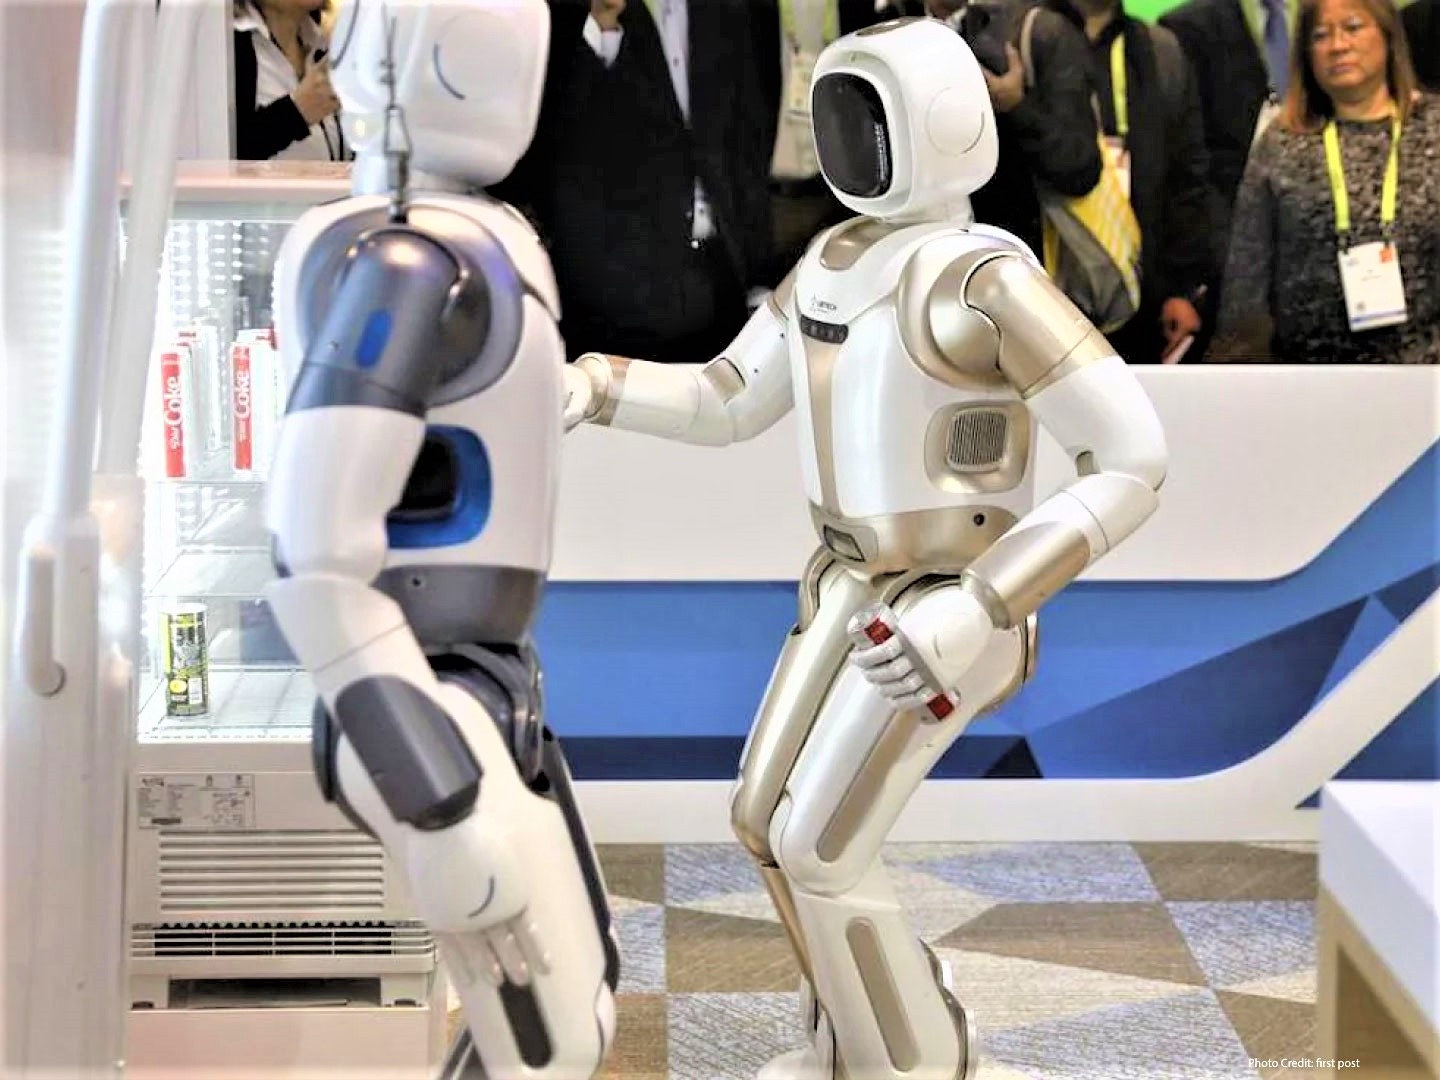  A pair of white and gold colored Nao humanoid robots stand on display at a technology convention.